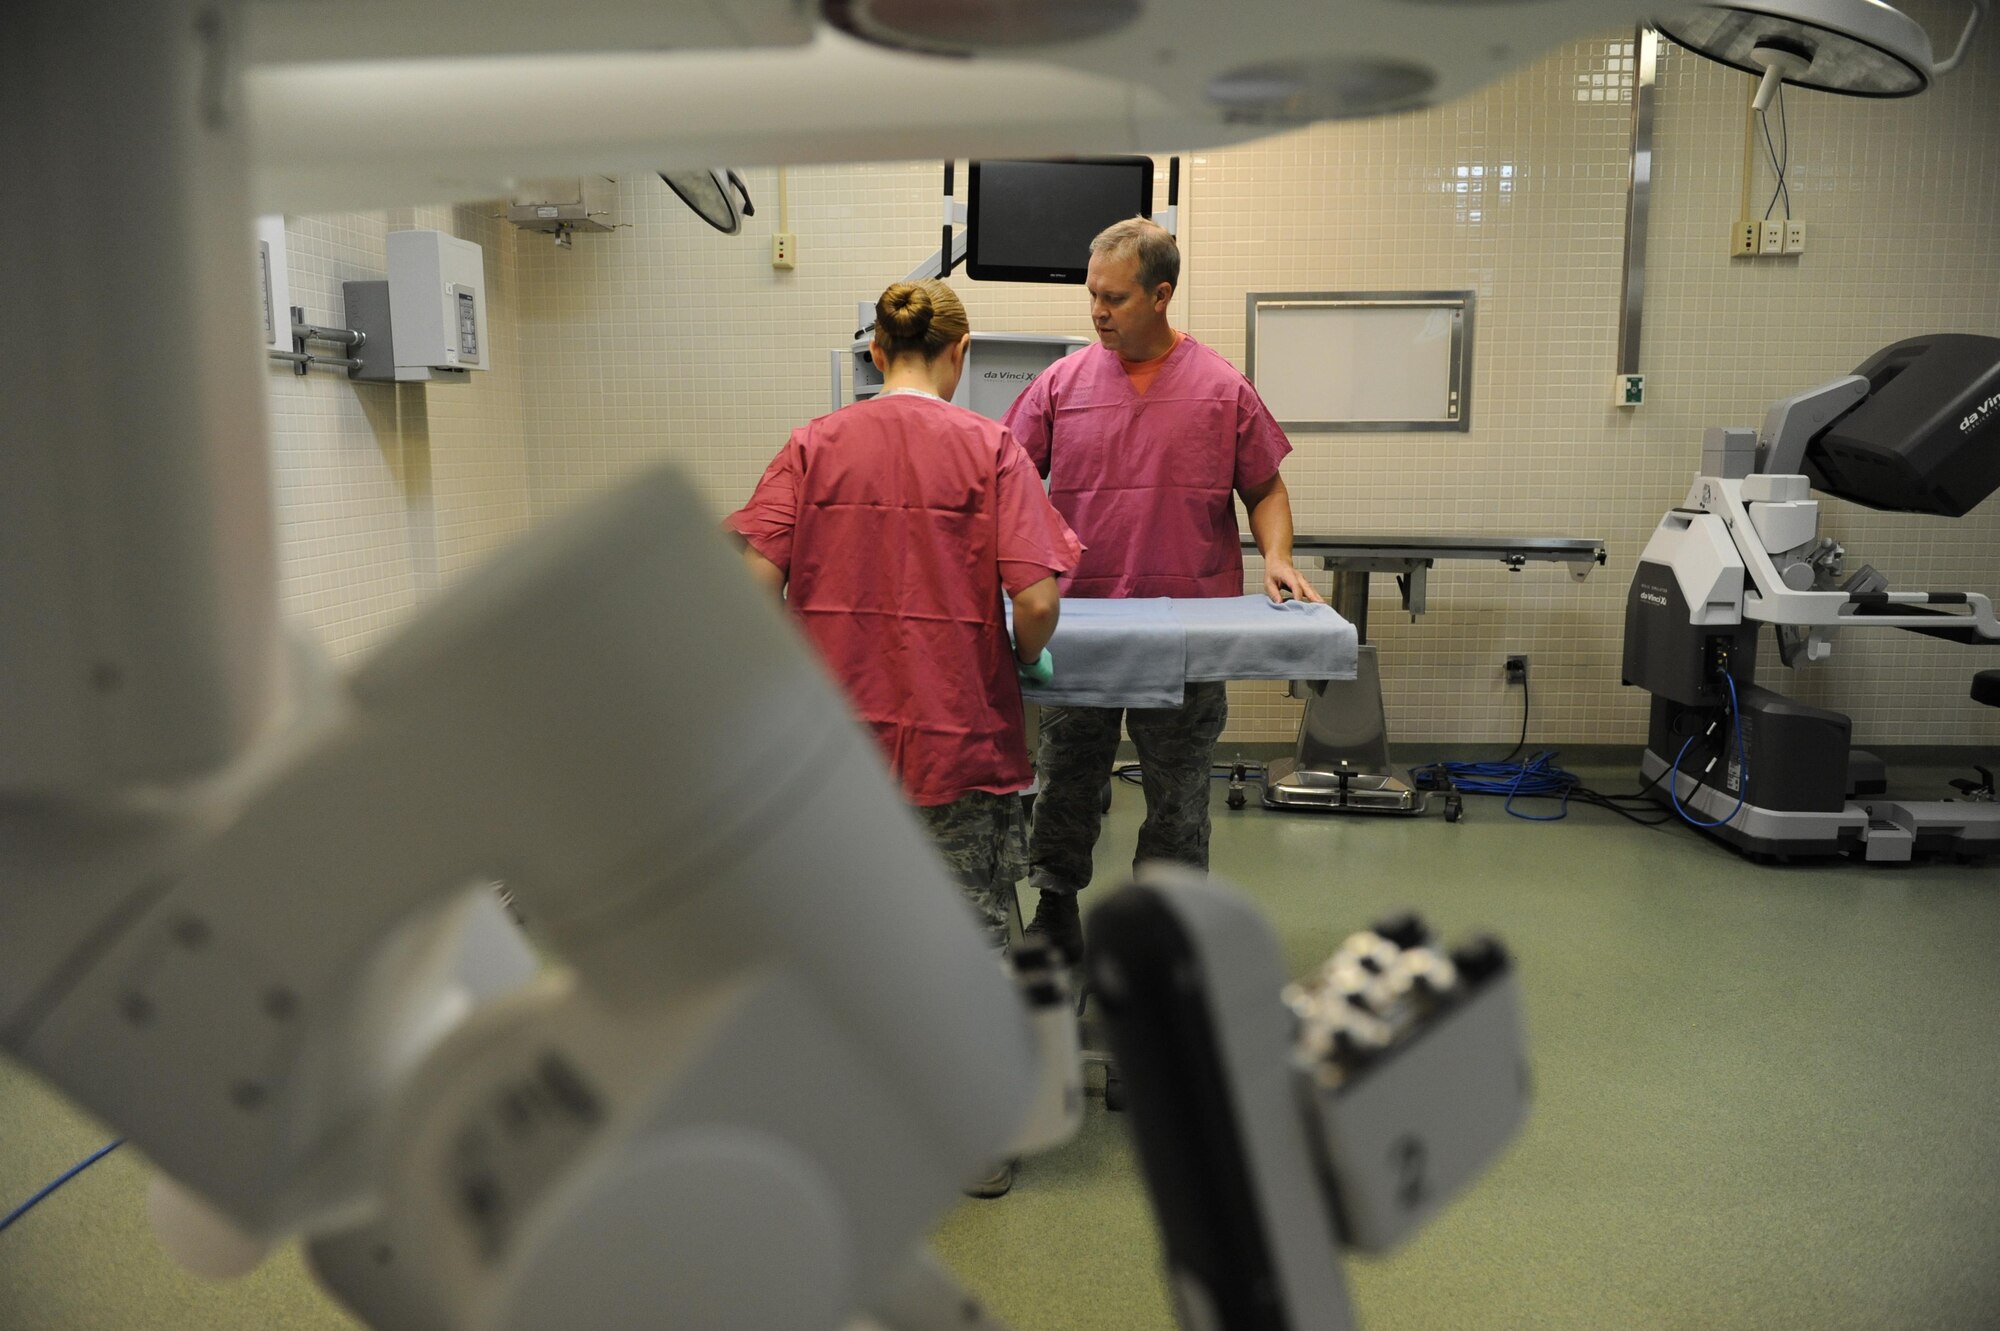 Staff Sgt. Mandy Polen, 81st Medical Support Squadron clinical research laboratory NCO in charge, and Lt. Col. (Dr.) Thomas Shaak, 81st MDSS clinical research laboratory director, prepare a table site for robotic surgical training at the Clinical Research Laboratory Oct. 21, 2016, on Keesler Air Force Base, Miss. The Keesler Medical Center recently acquired two of the da Vinci Xi which is one of the newest robotic surgical systems out there and the first of its kind for the Air Force. One surgical robot is set up as part of the Institute for Defense Robotic Surgical Education to assist surgeons in getting their official robotic surgery credentials. (U.S. Air Force photo by Kemberly Groue/Released)